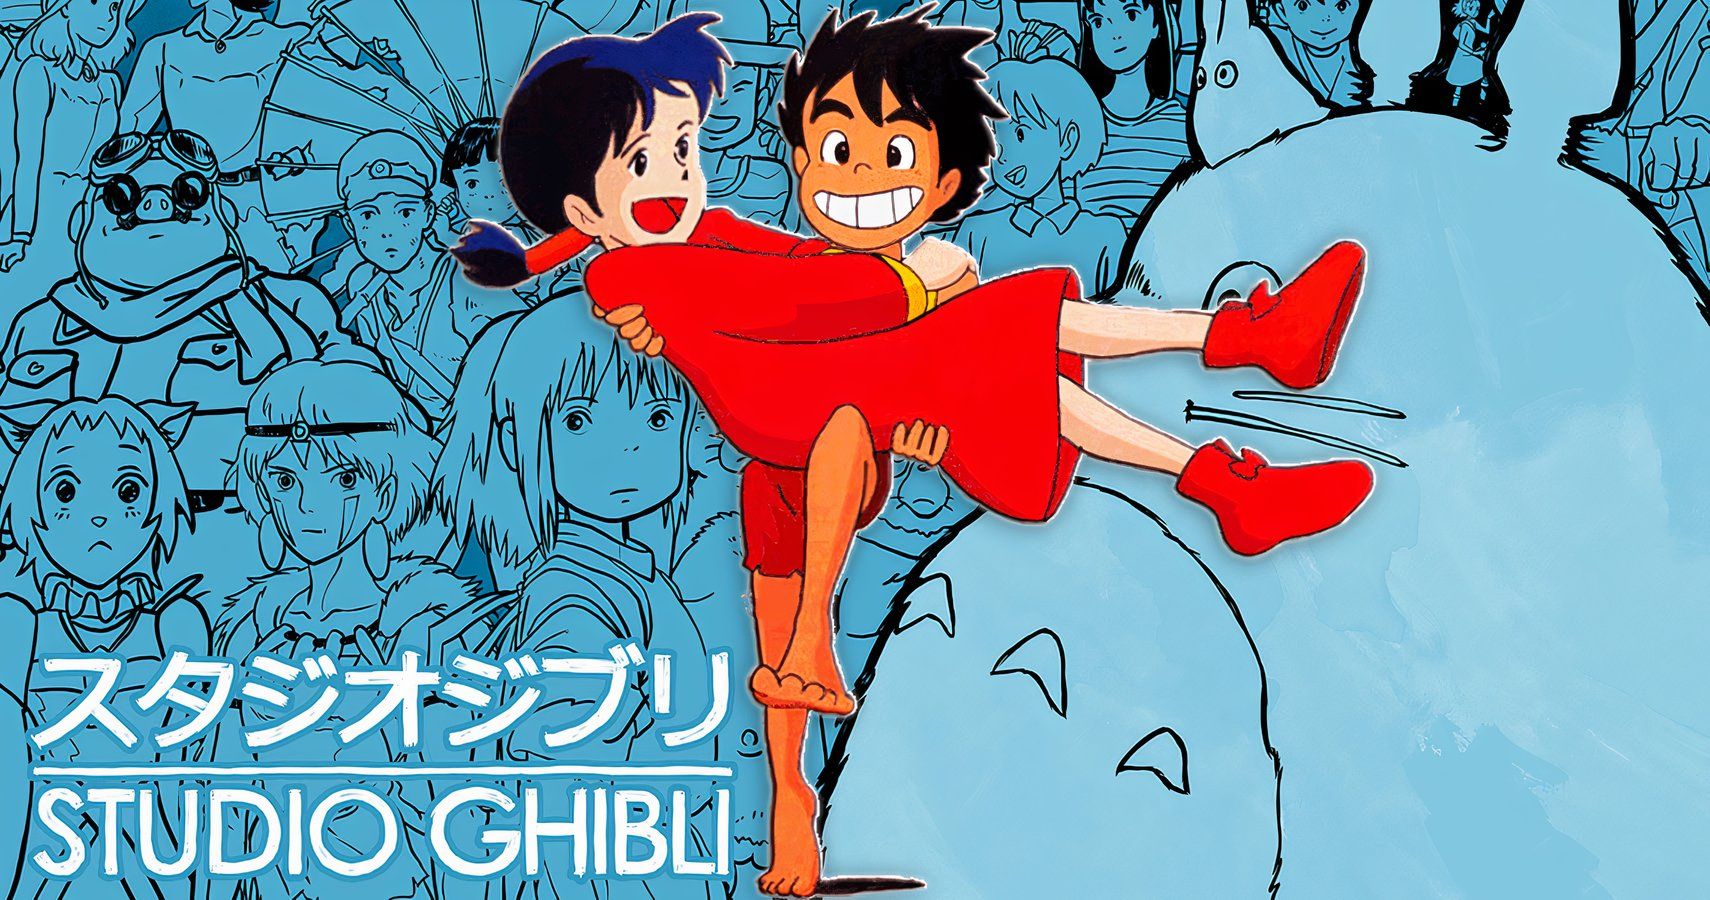 Future Boy Conan's main characters on a backdrop of Studio Ghibli characters tinted in blue